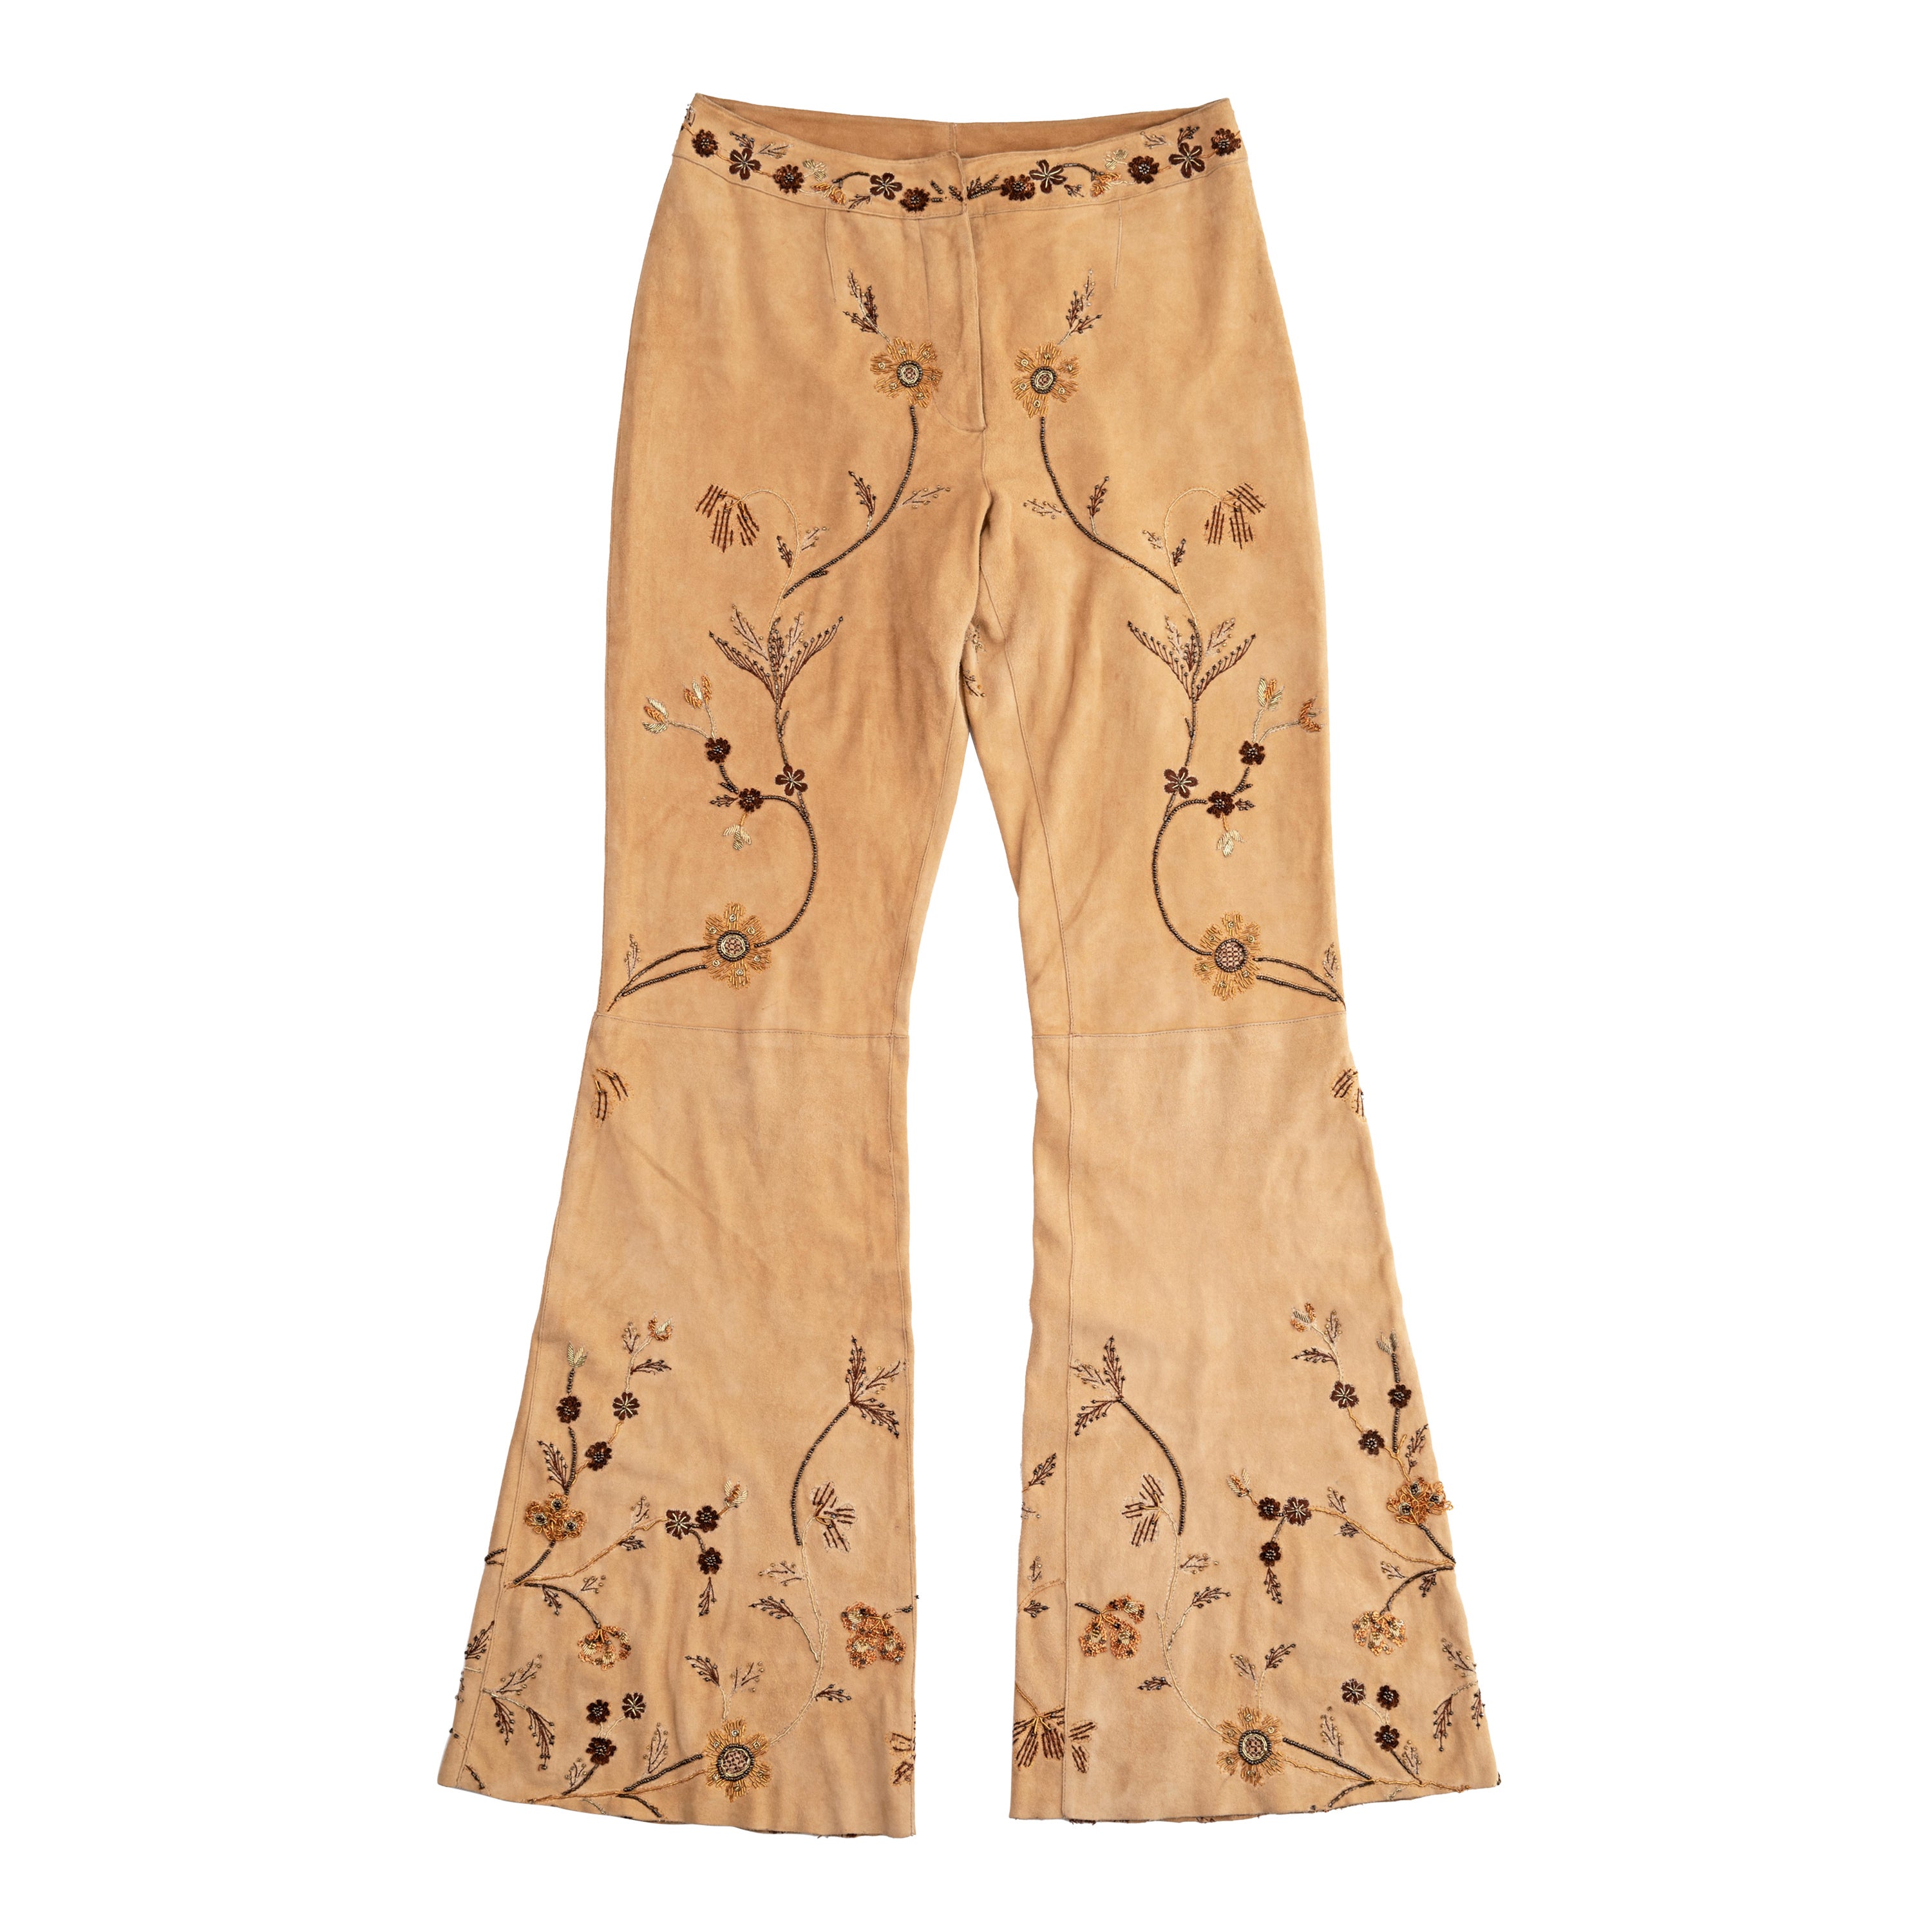 Dolce & Gabbana cream goat suede embroidered flared pants, ss 2001 For Sale